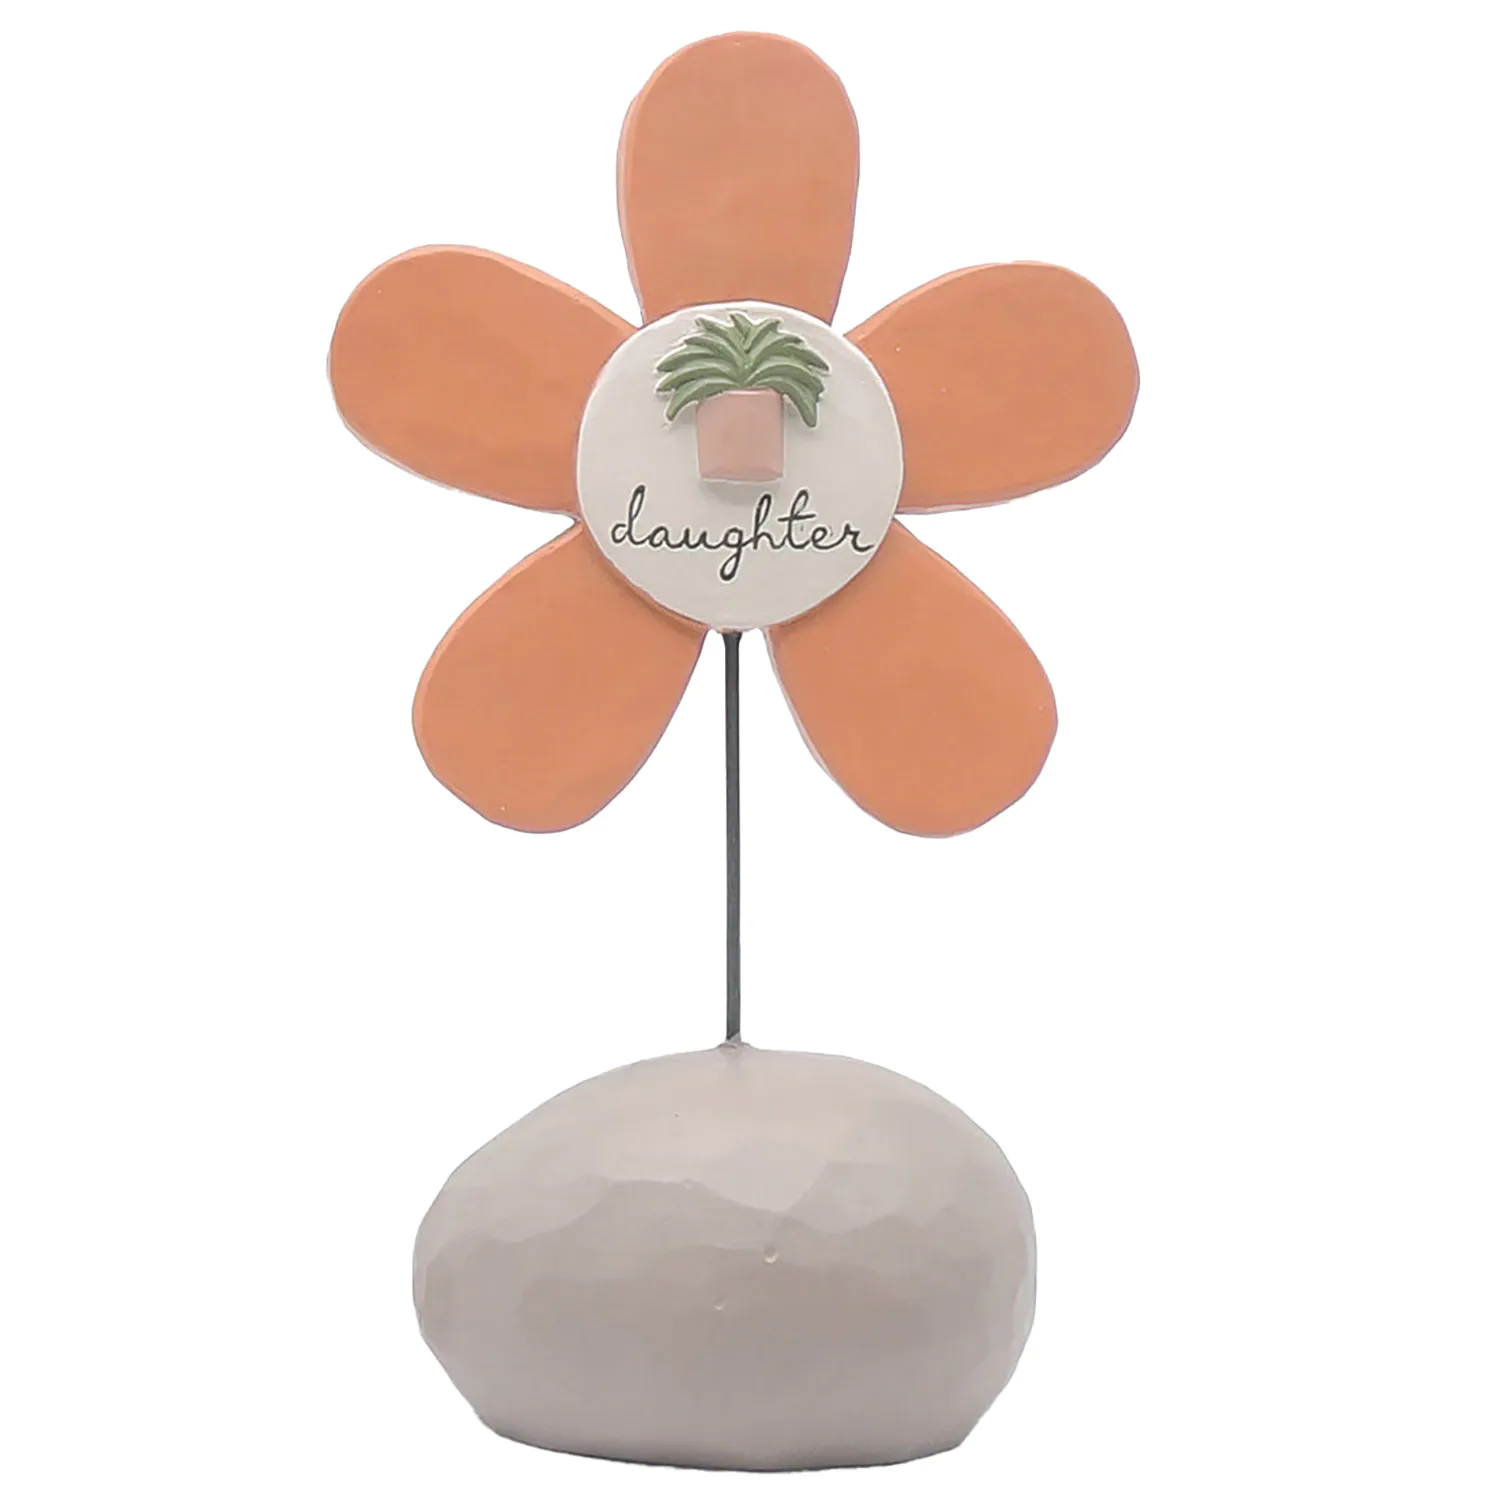 Cost-effective Resin Flower Crafts Bright Blessings Orange Daughter Flower Figurine for Home Decor 231-13593